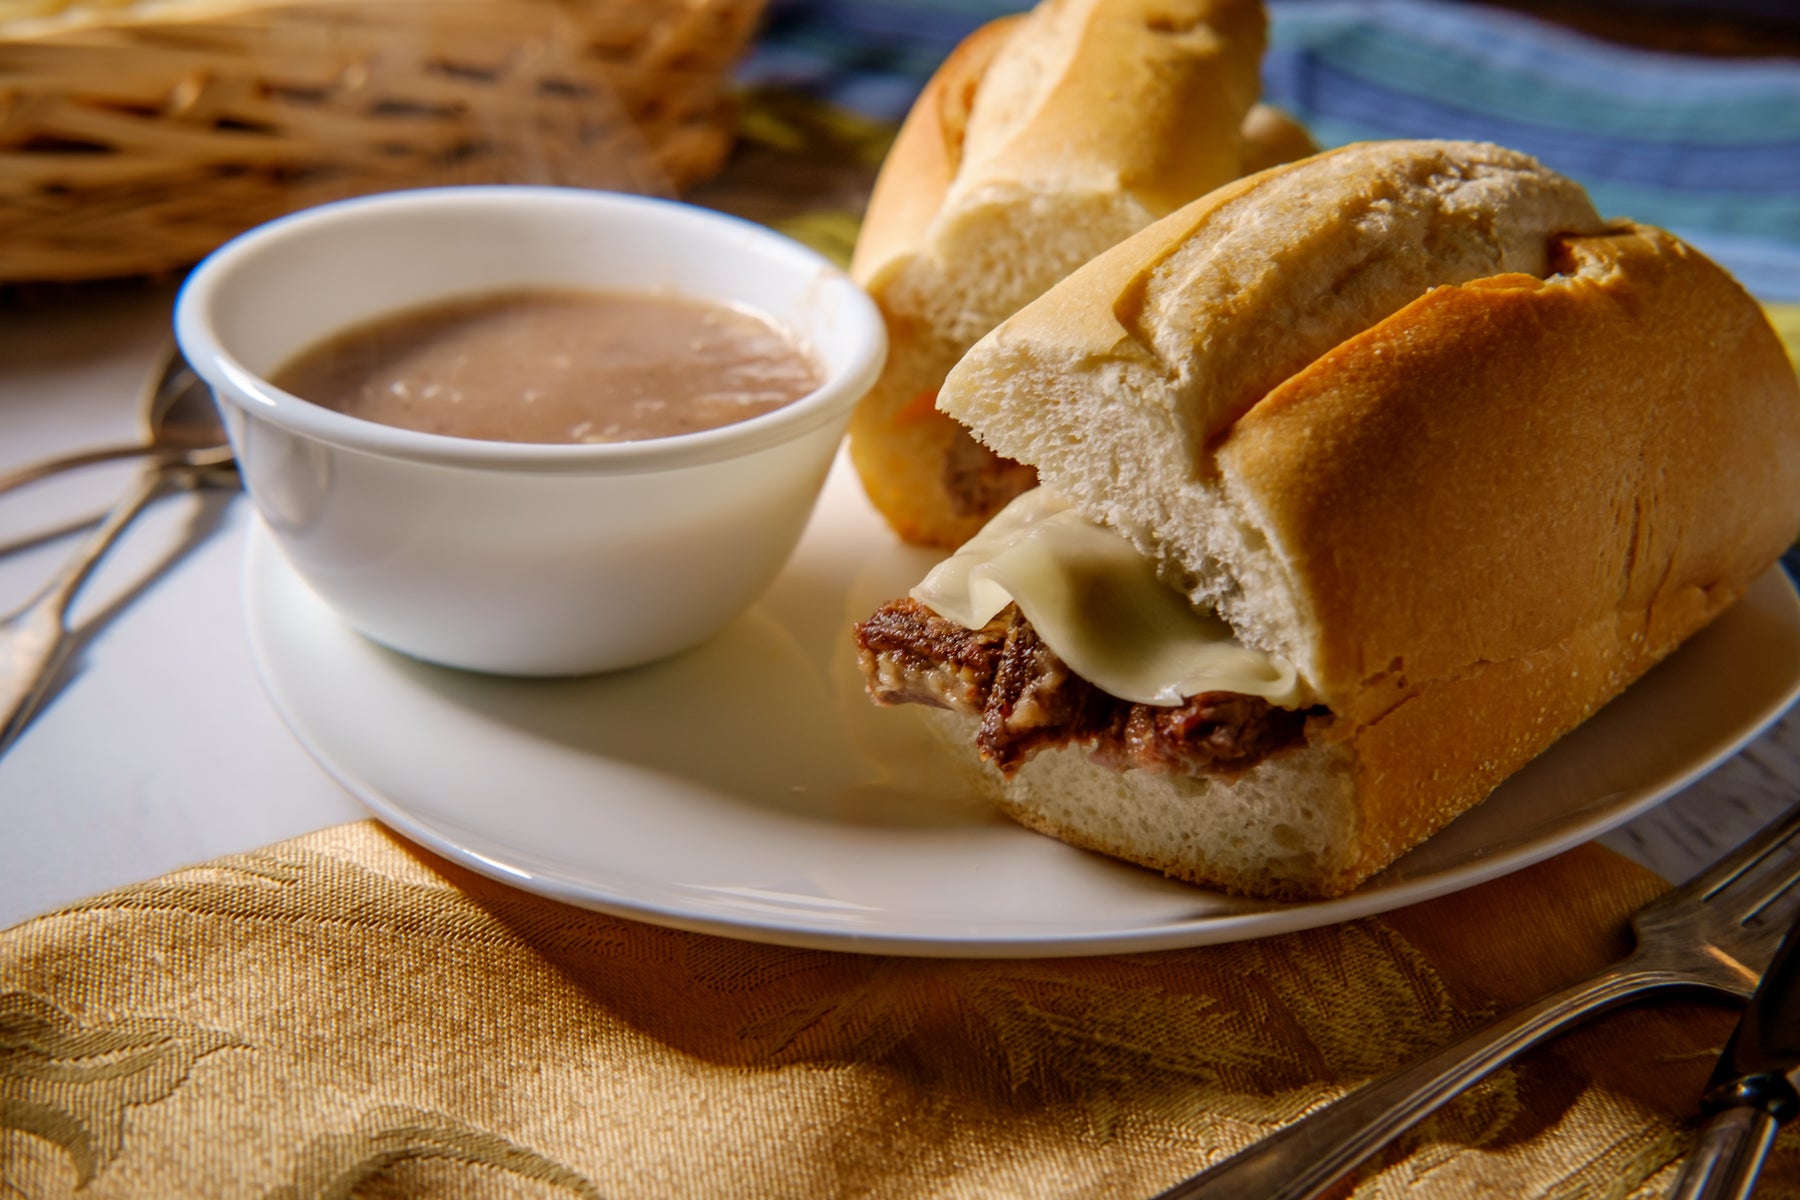 Easy French Dip Sandwiches